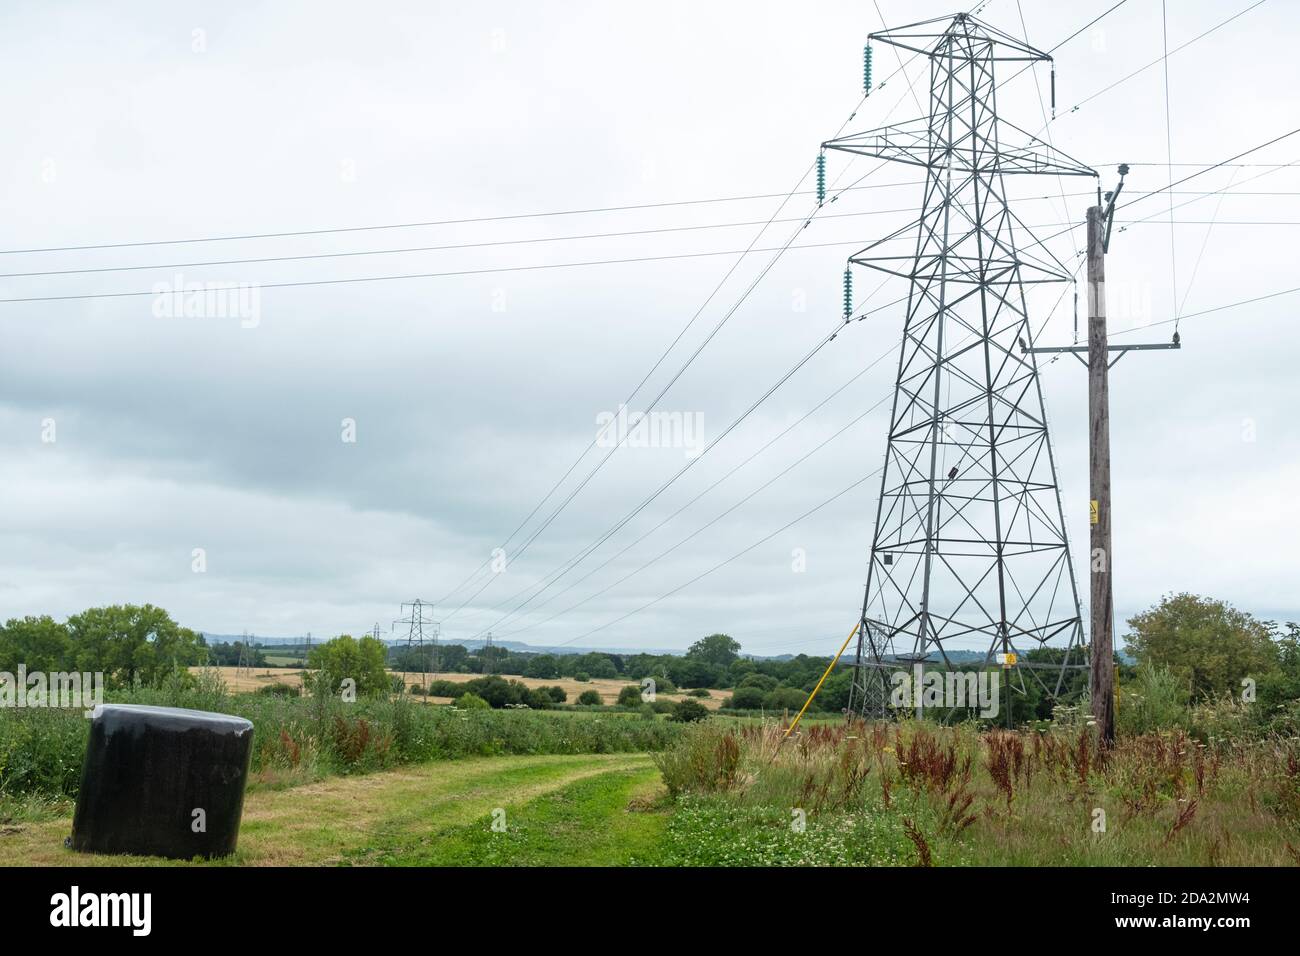 Rural landscape with silage bale and electricity pylon at the entrance to a farm field in southern England Stock Photo